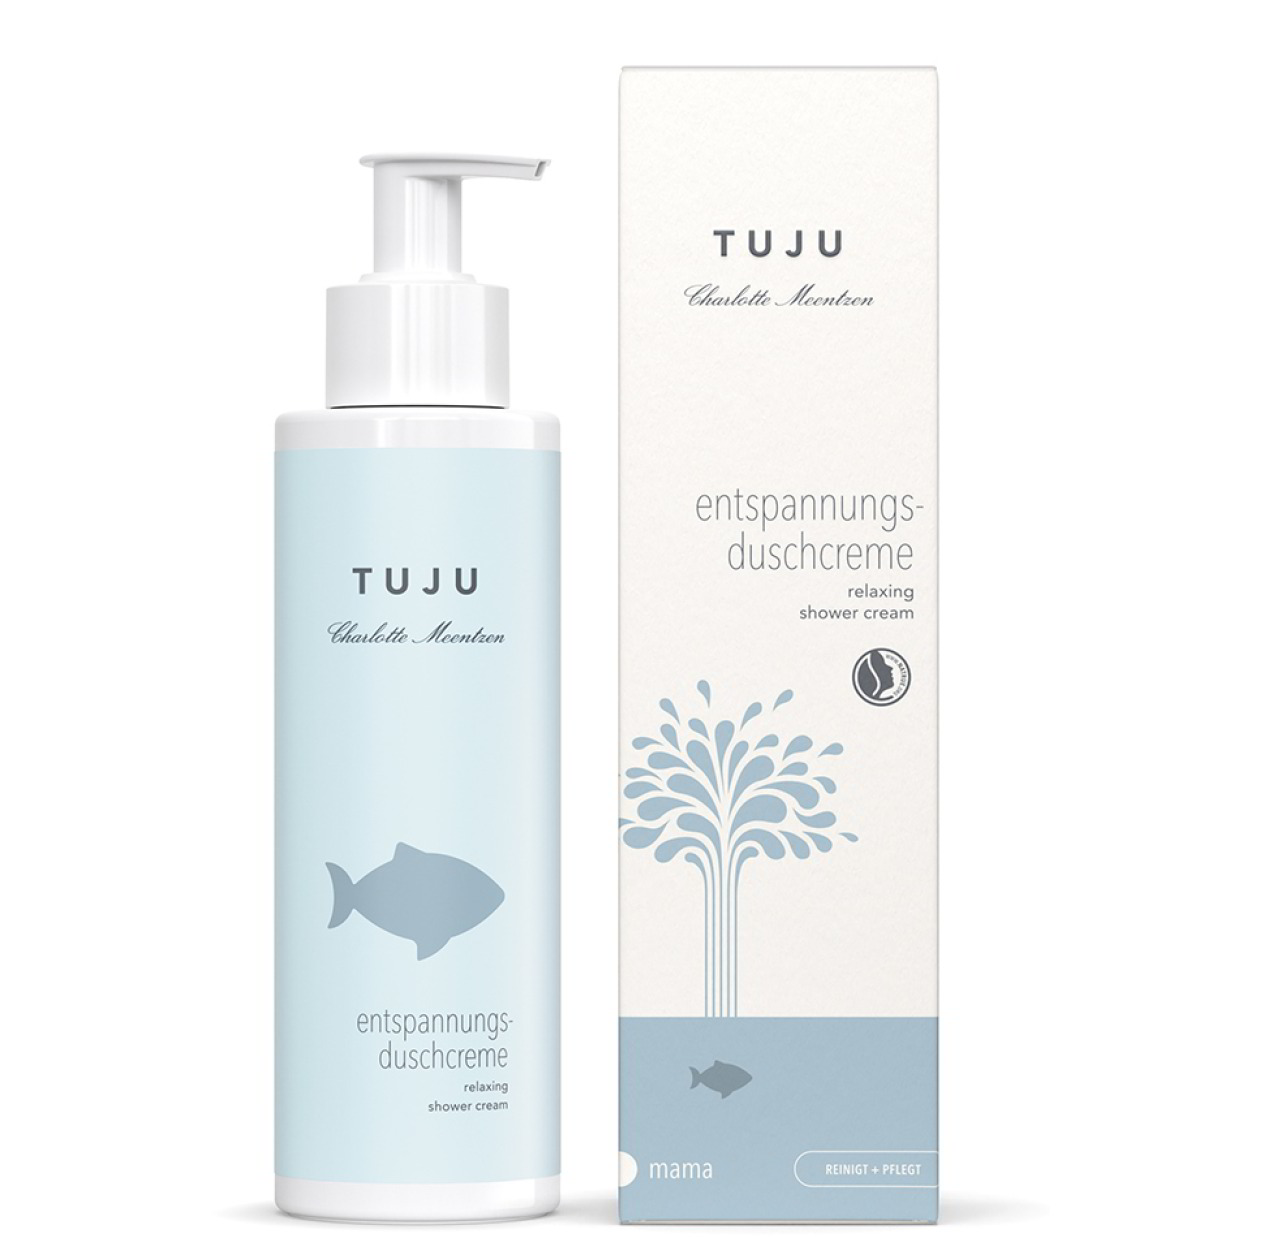 TUJU Relaxing Shower Cream For me-time that saves times